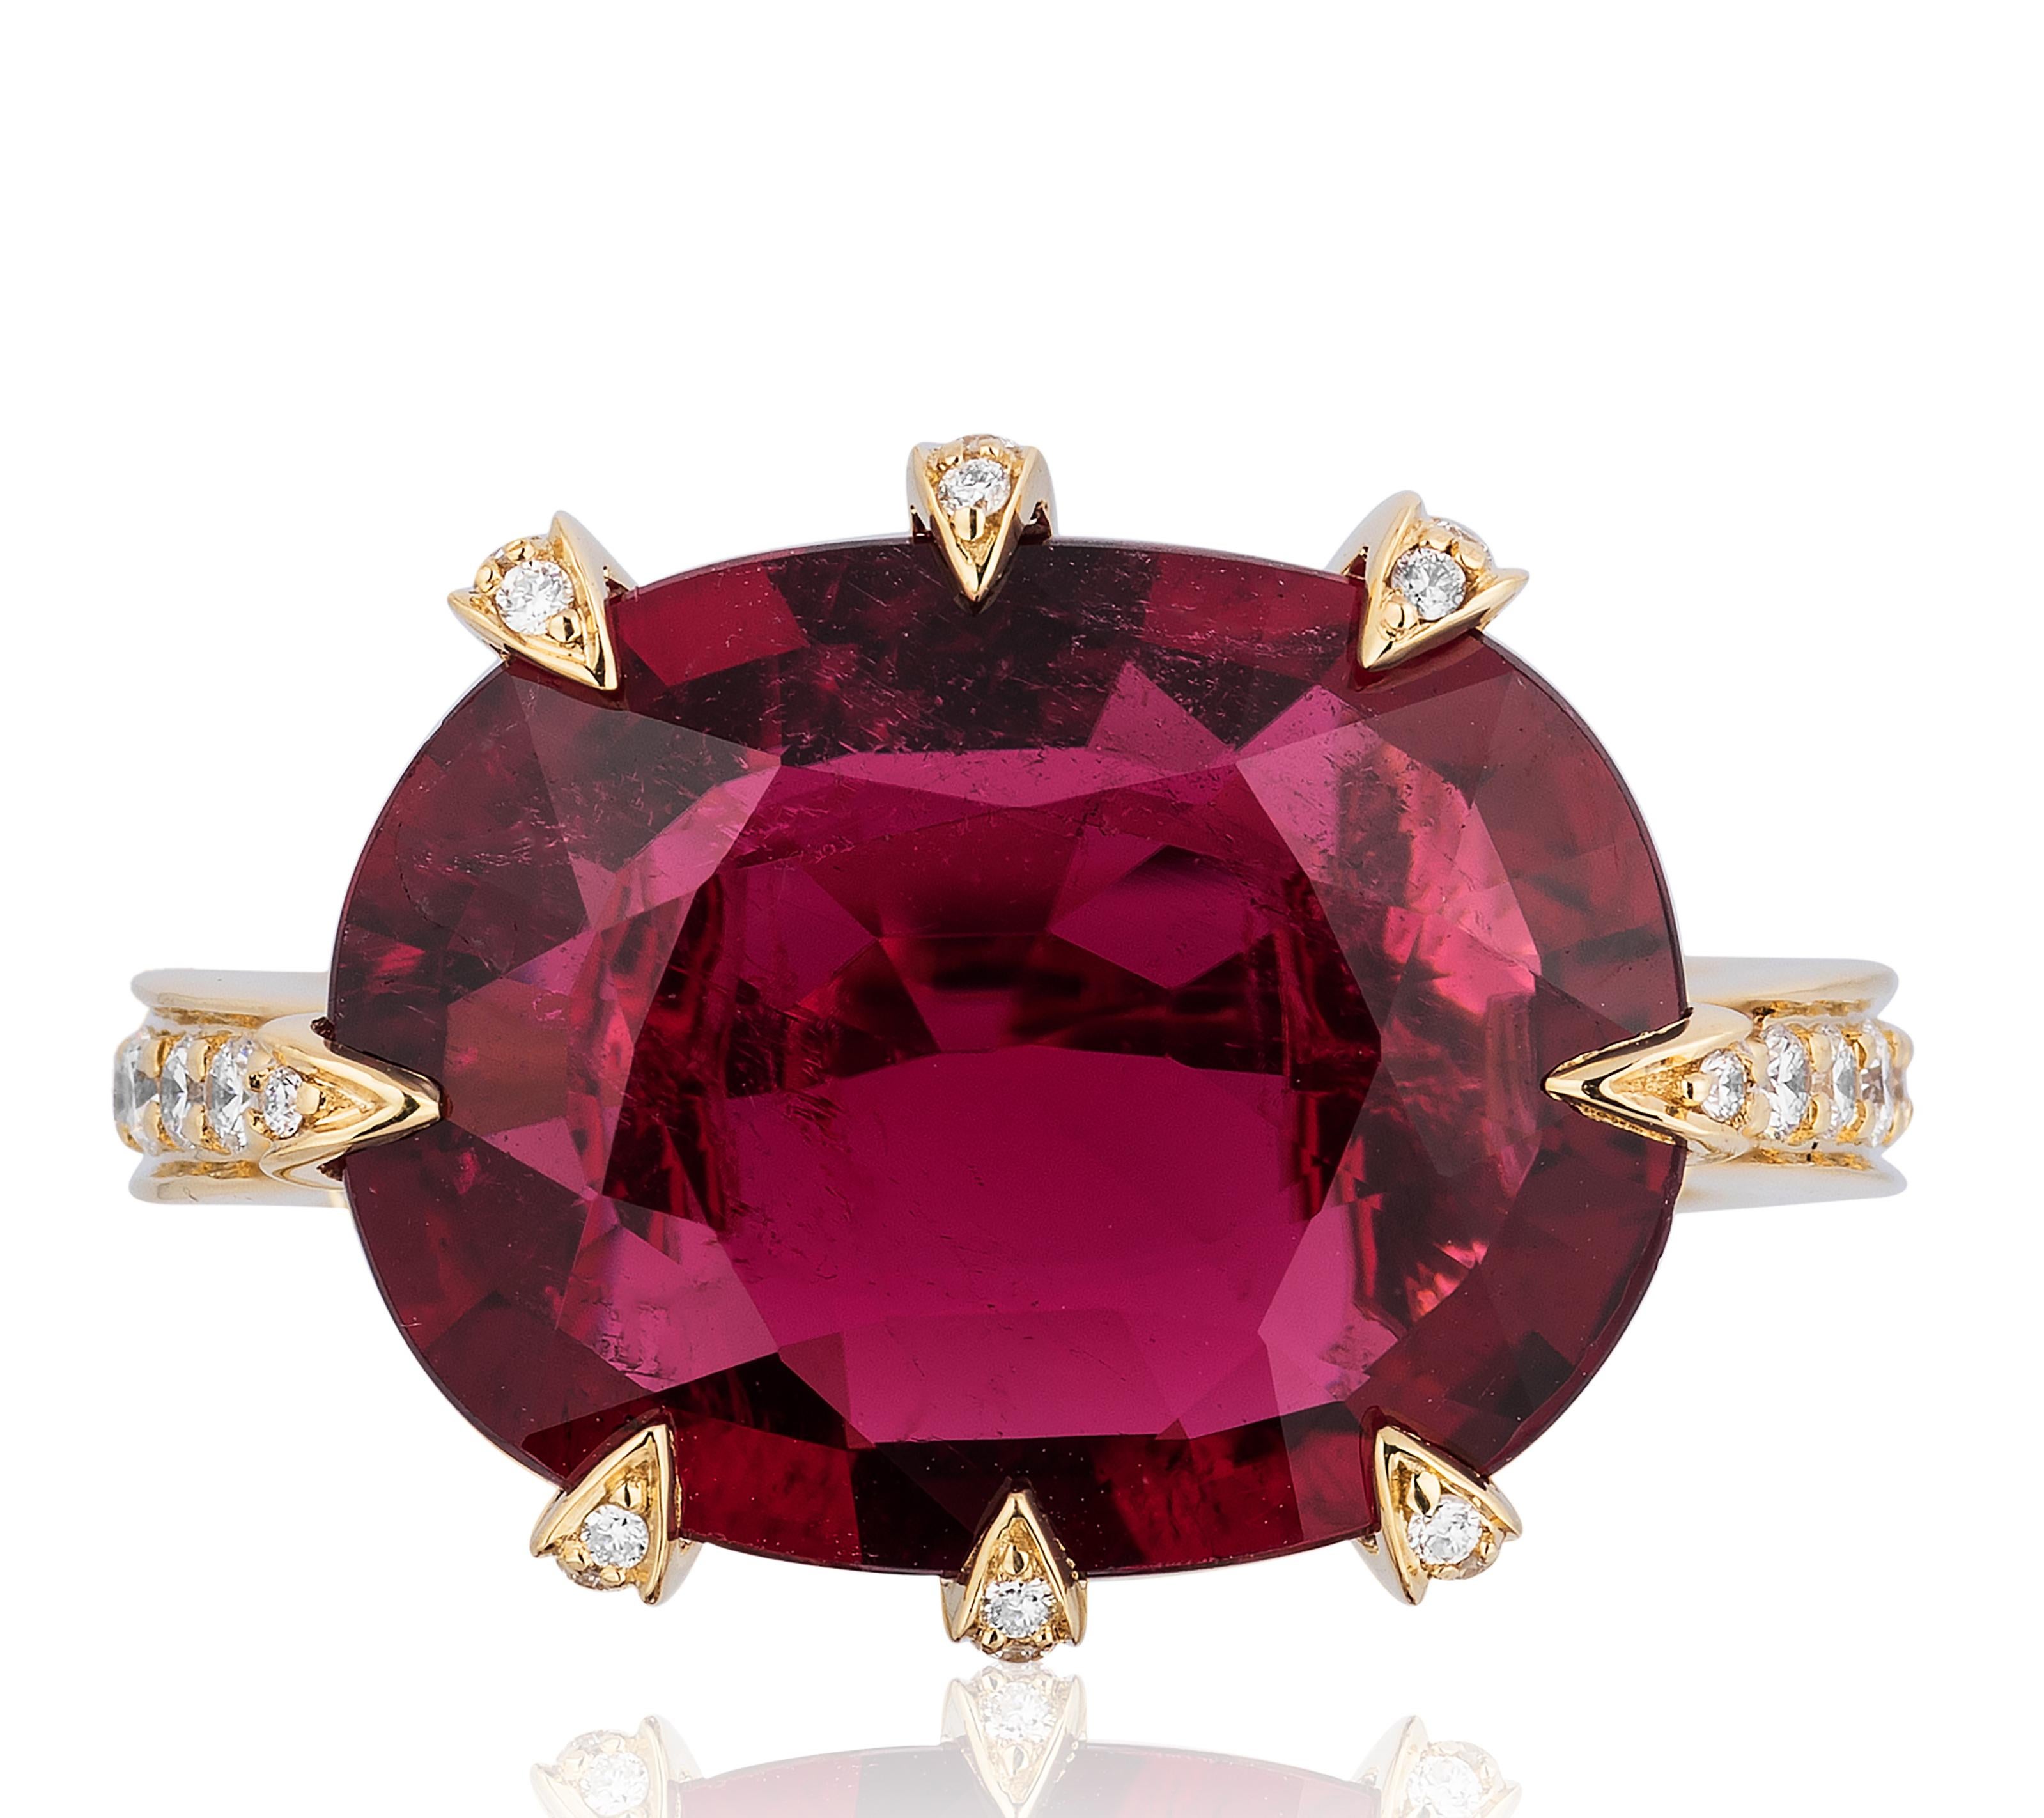 Large Oval Rubellite Ring with Diamonds in 18K Yellow Gold, from 'G-One' Collection 

Stone Size: 16 x 12 mm 

Approx. Stone Wt: 7.62 Carats (Rubellite)

Diamonds: G-H / VS, Approx. Wt: 0.41 Carats